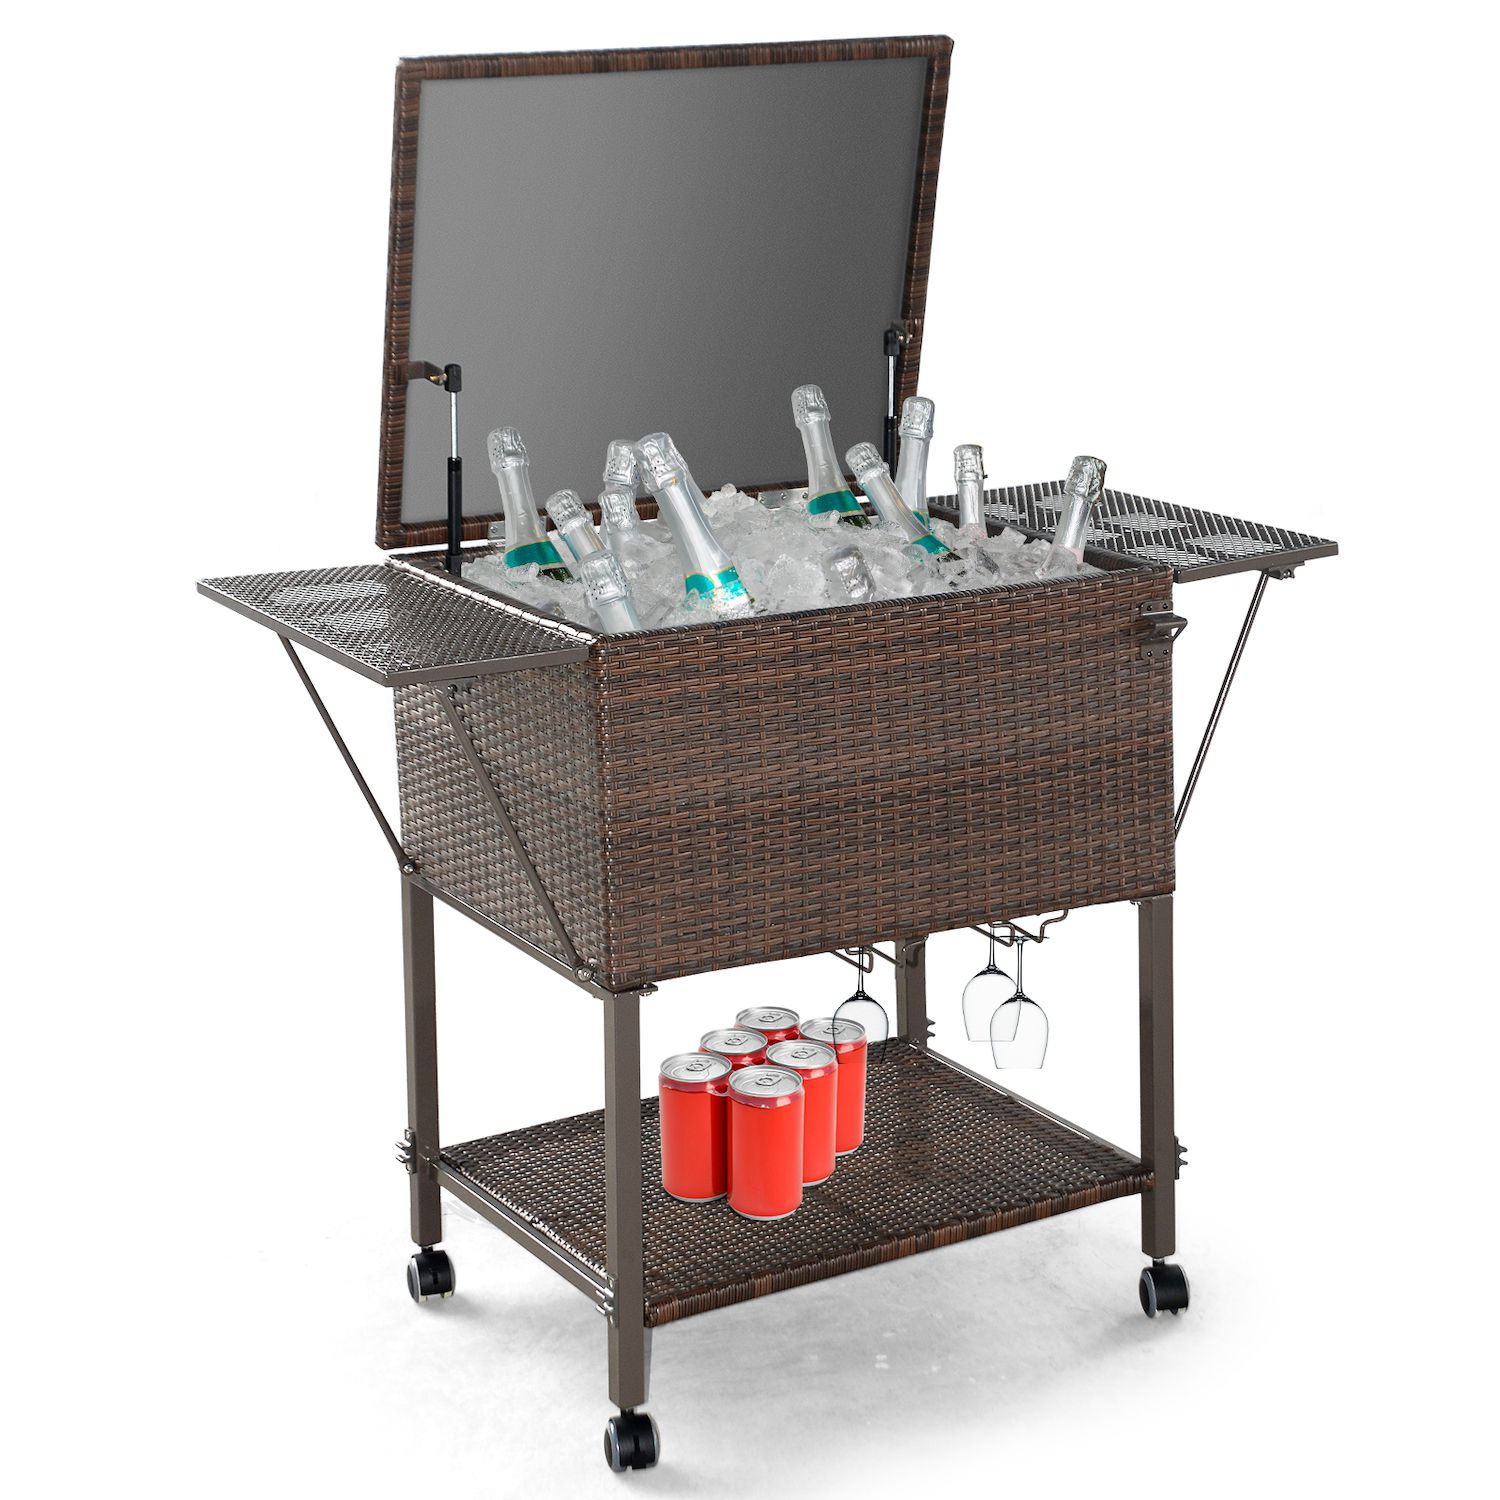 Mdesign Small Portable Mini Fridge Storage Cart With Wheels And